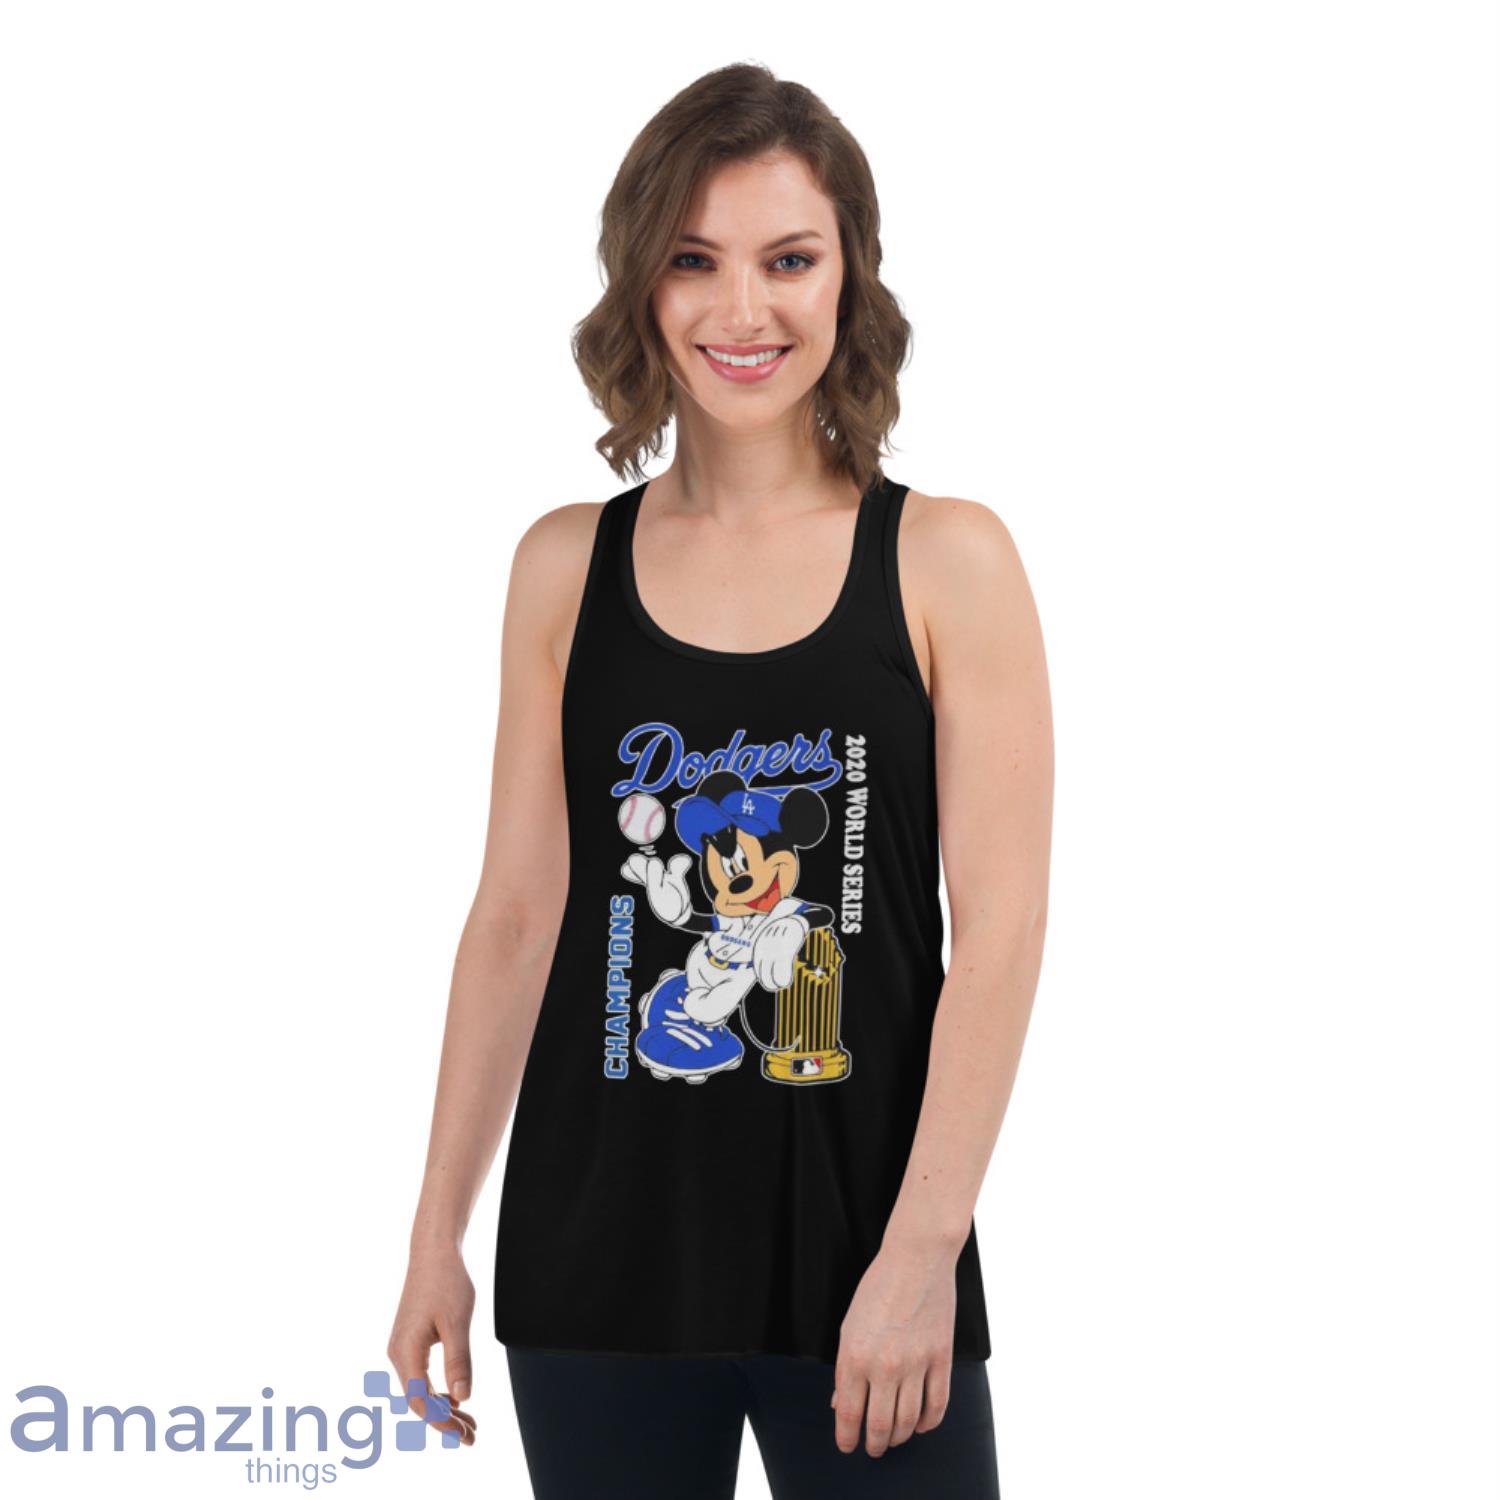 Mickey mouse peace love Los Angeles Dodgers shirt